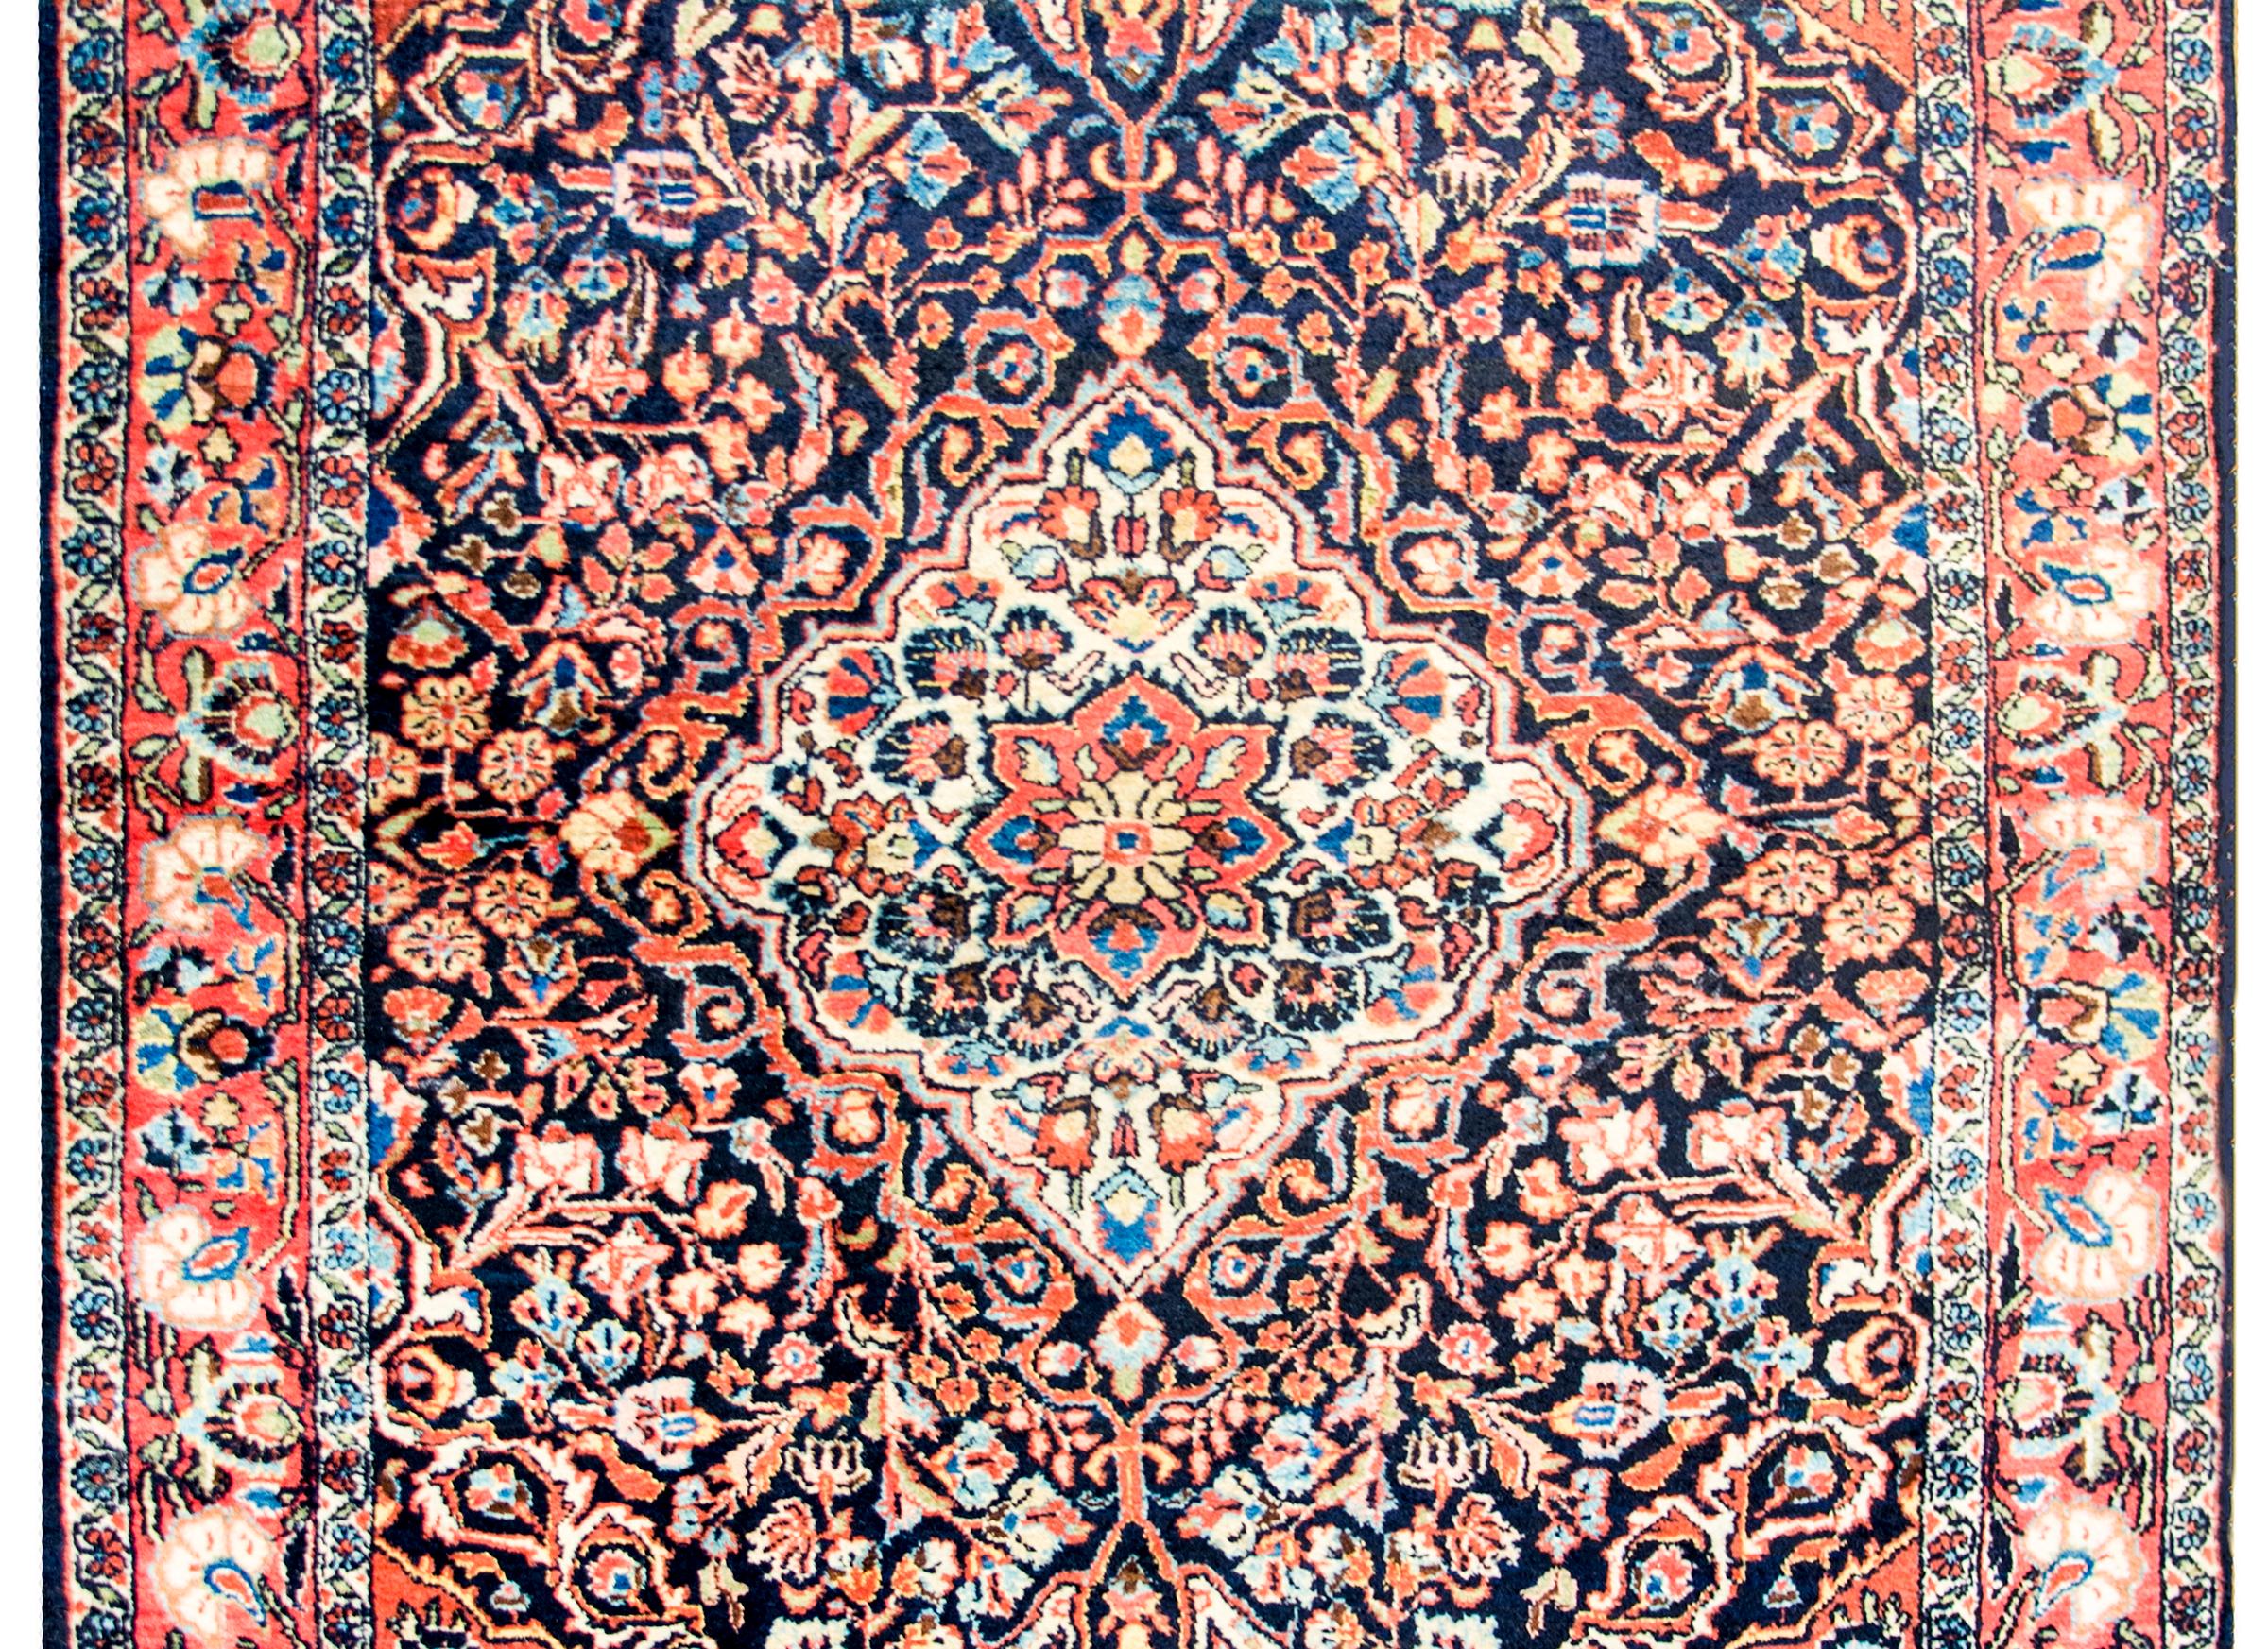 A wonderful early 20th century, Persian Sarouk rug with an exceptionally beautiful pattern containing a large central diamond medallion, amidst a field of all-over mirrored scrolling vines and flowers woven in crimson, pink, cream, and light indigo